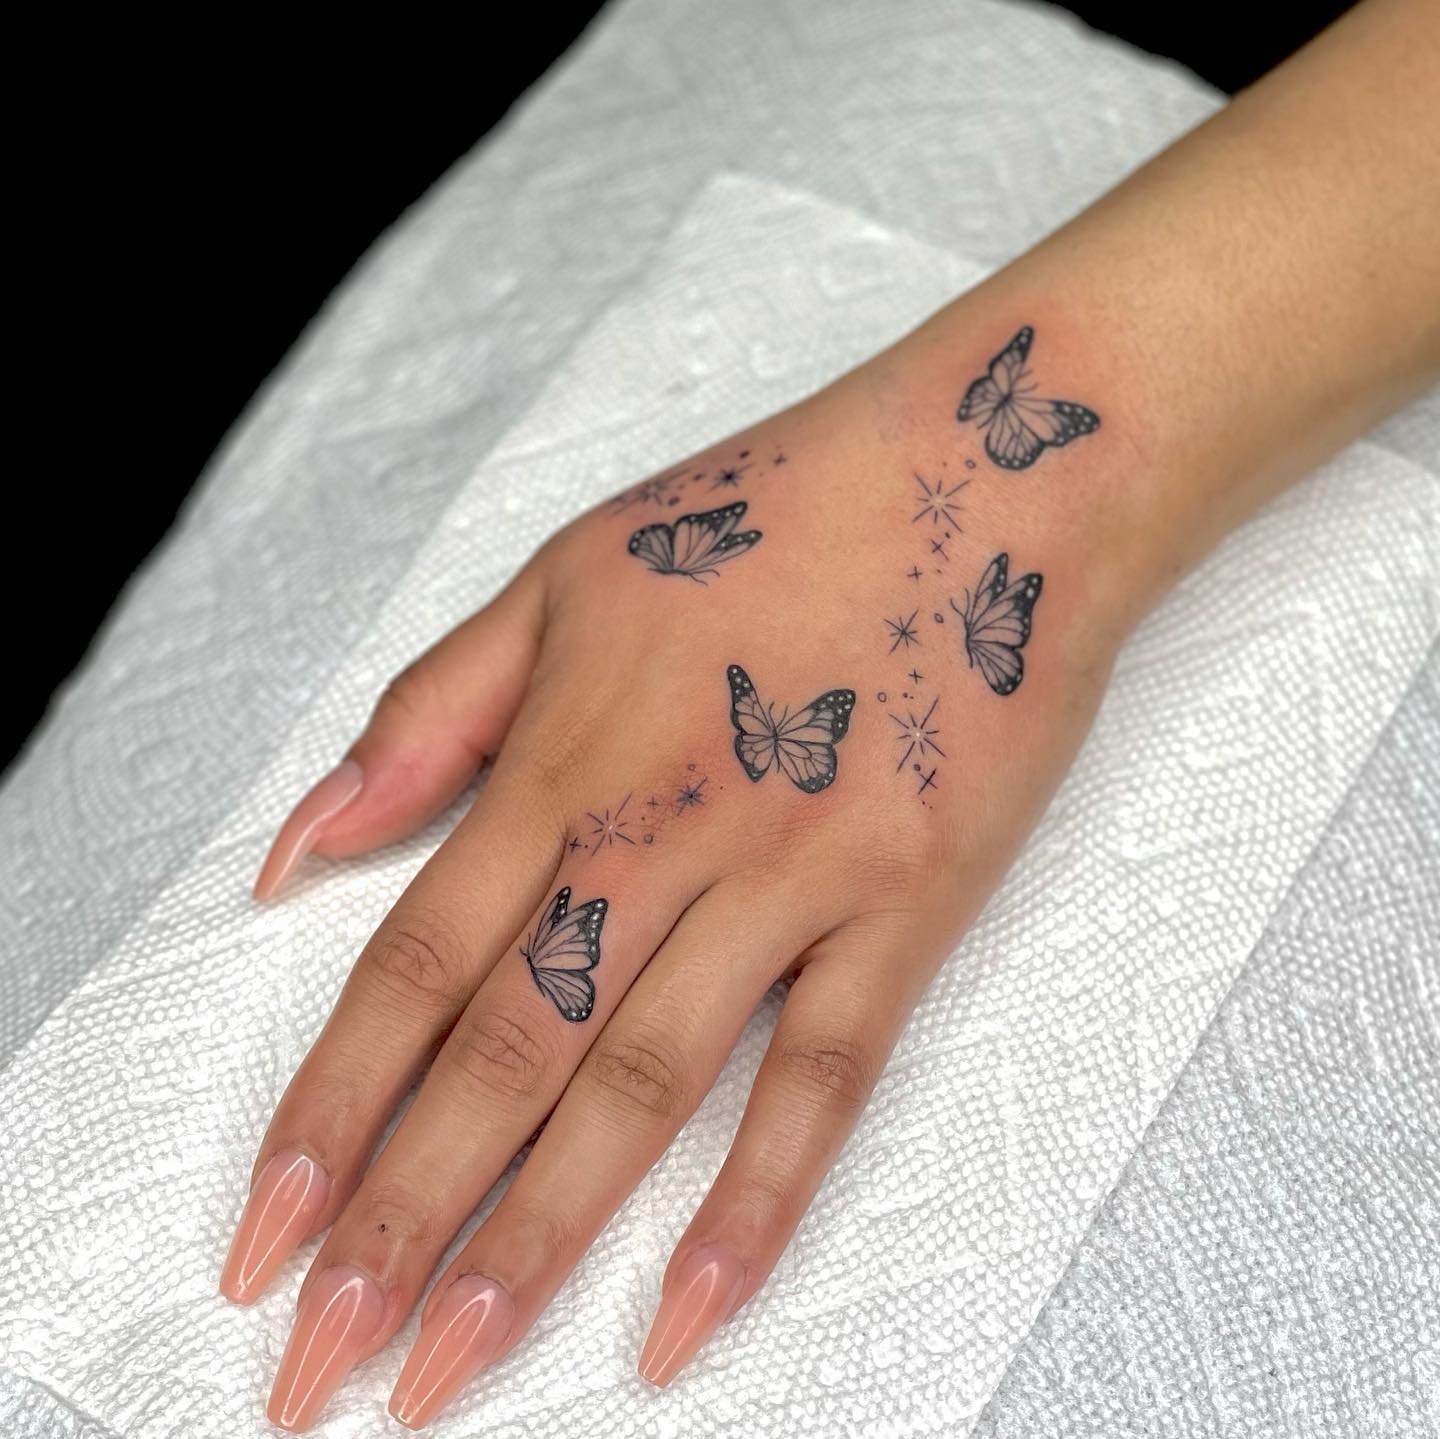 ﾟﾟseraphic  on Twitter my silly girly hand with my silly girly  finger tattoos httpstcoNUsgiaNbCr  Twitter